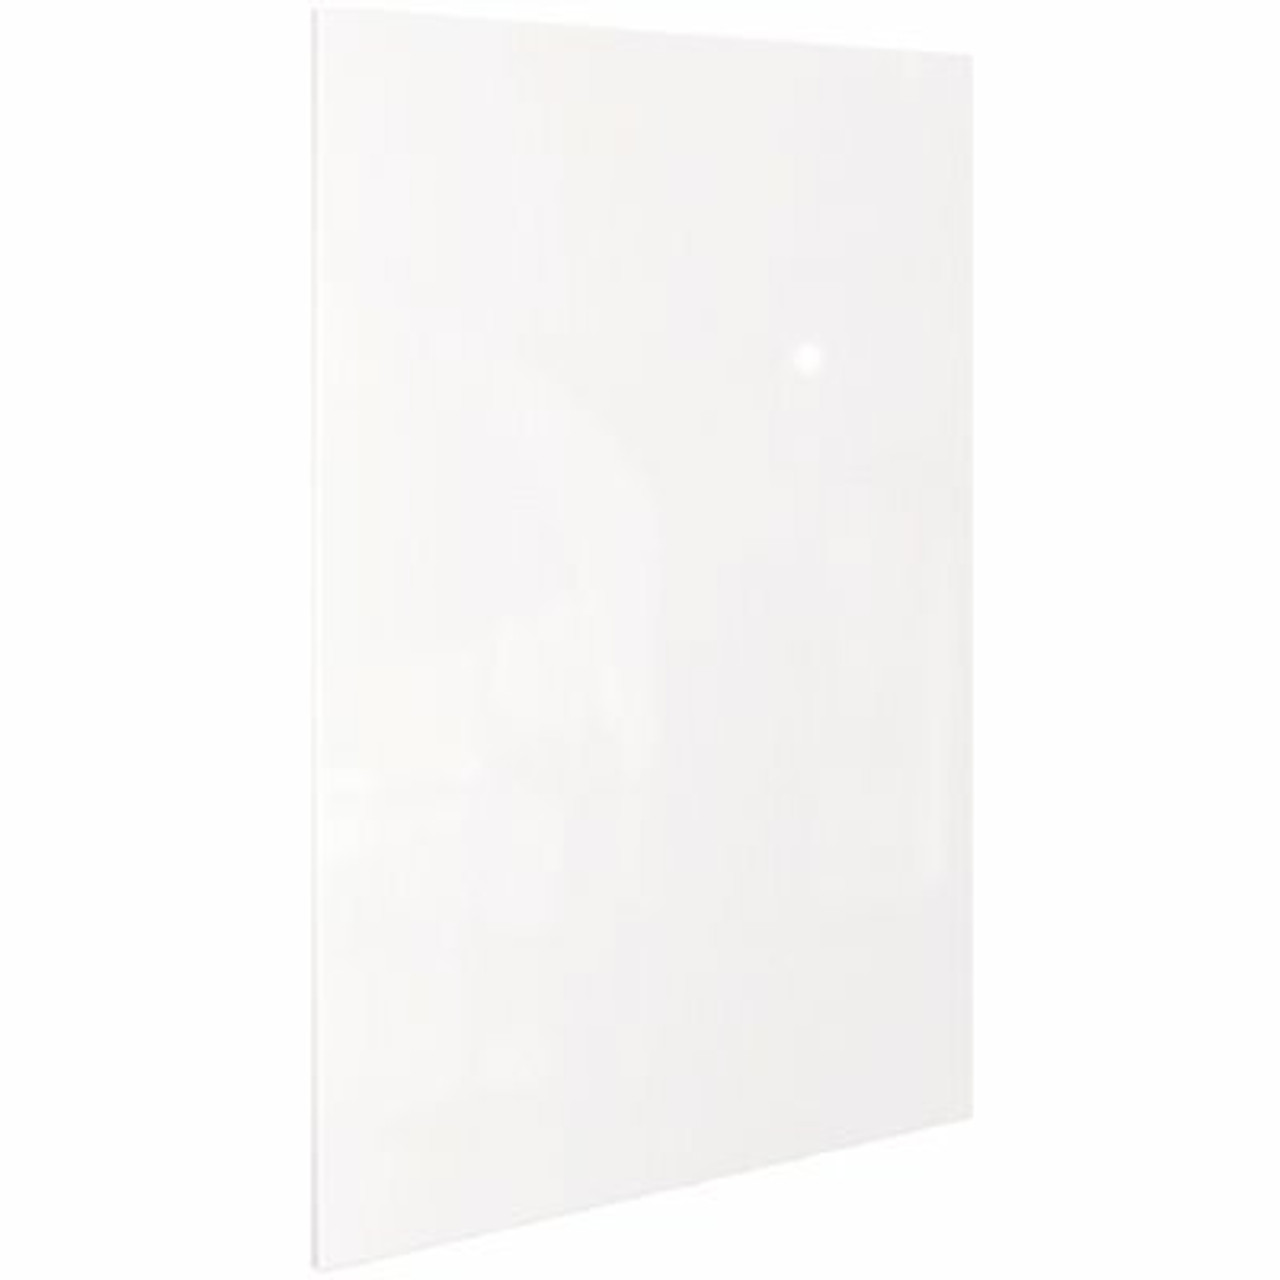 Cambridge Standard 42 In. X 12 In. X 1 In. Cabinet Decorative End Panel In White Gloss